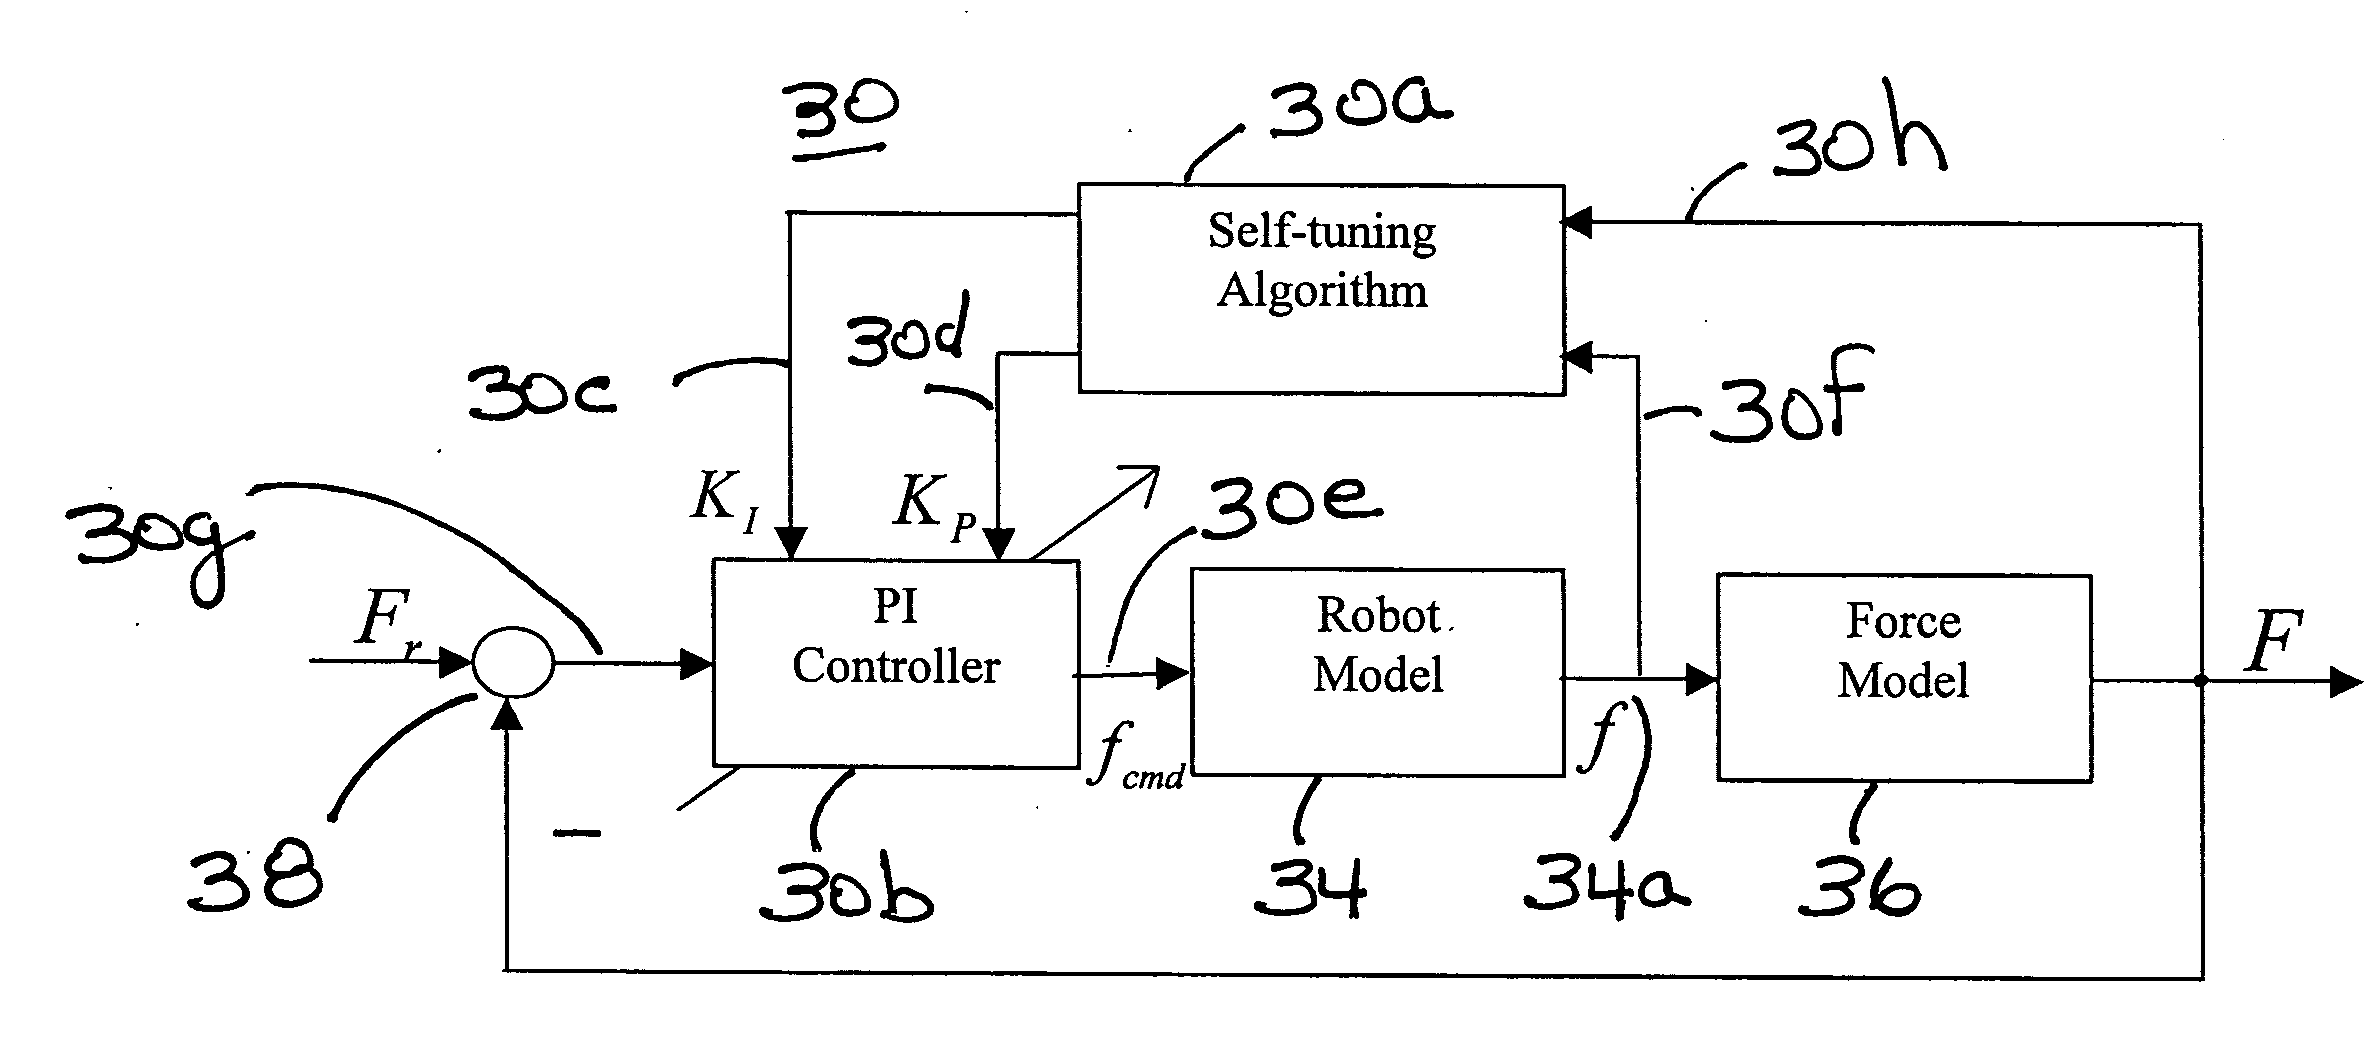 Controlled material removal rate (CMRR) and self-tuning force control in robotic machining process